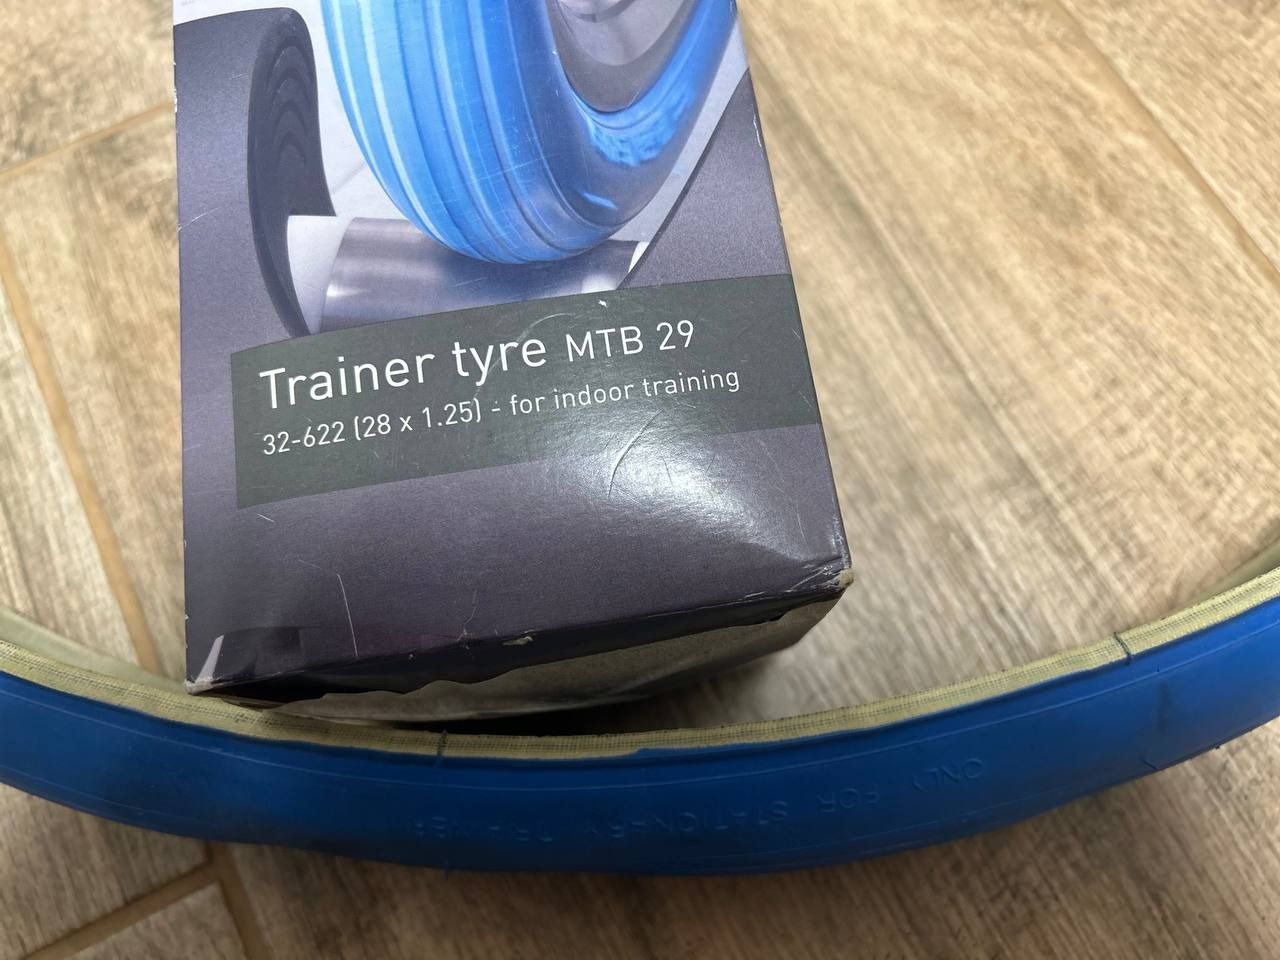 Покрышка Tacx trainer tyre